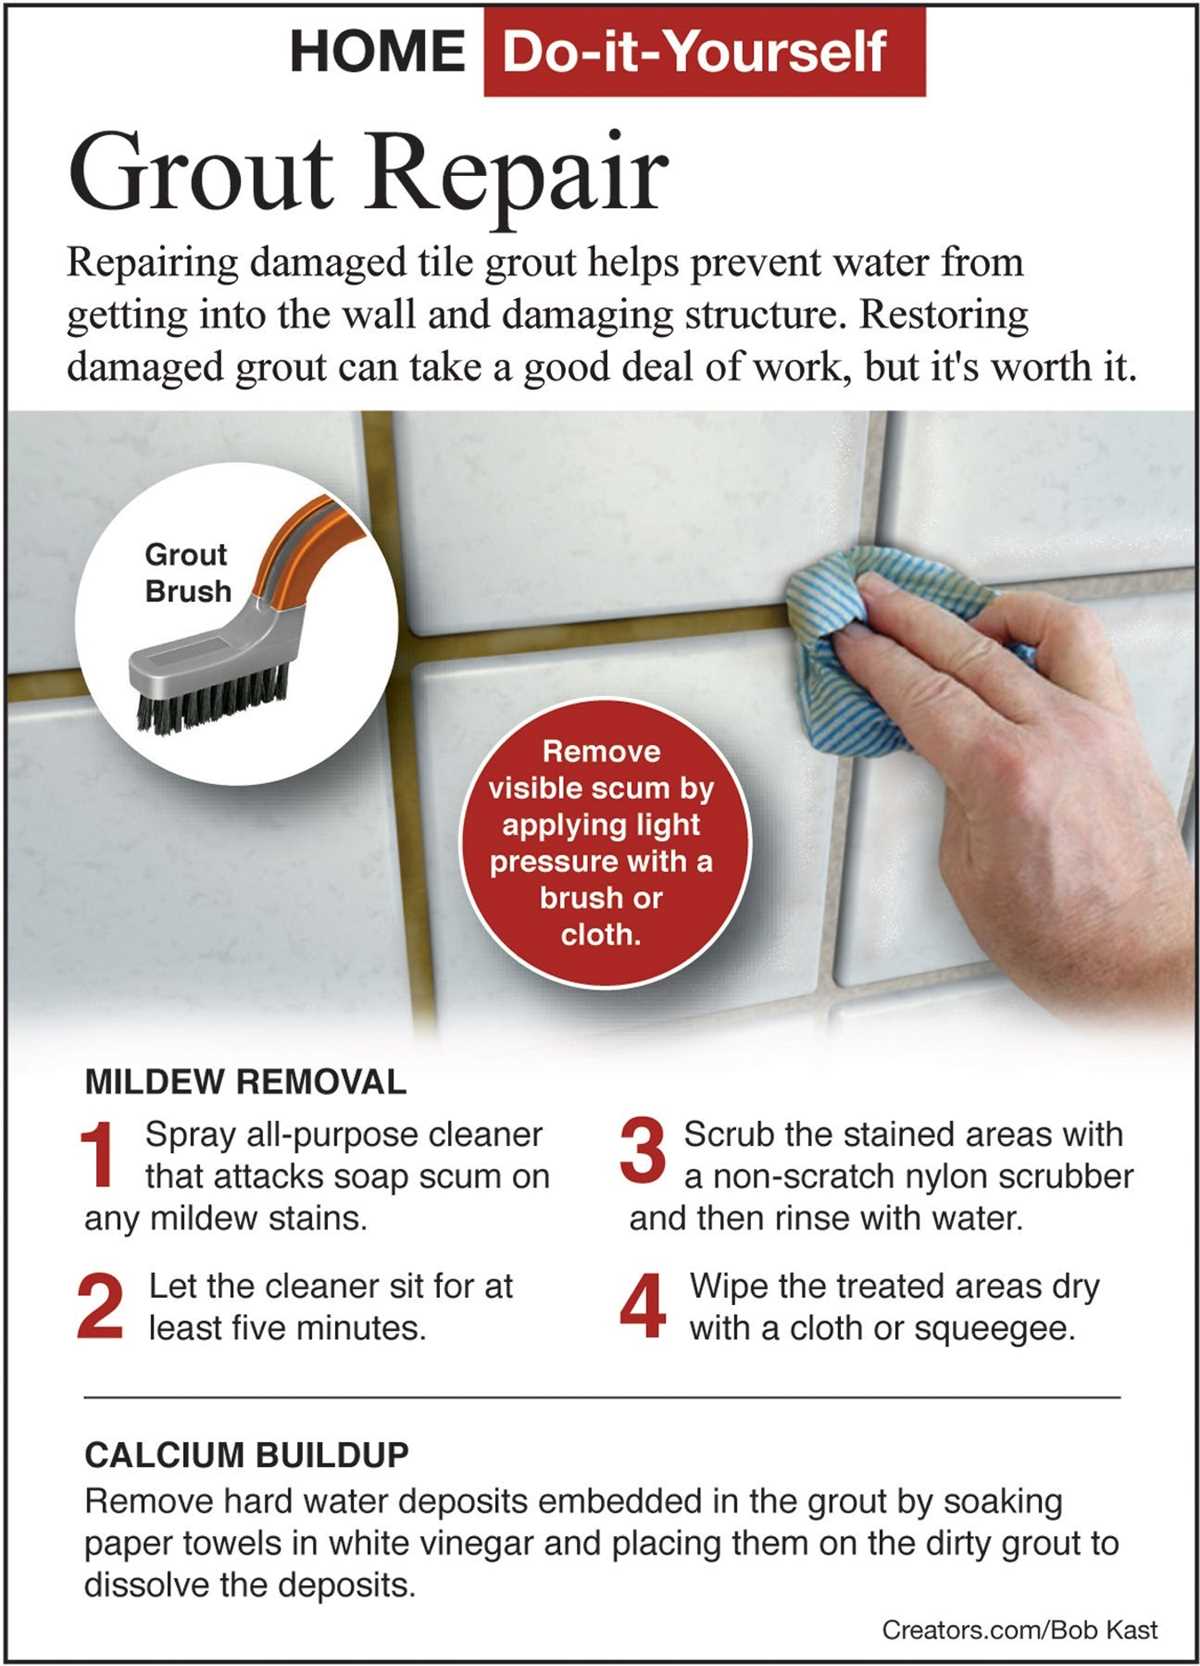 7. Follow Cleaning Instructions